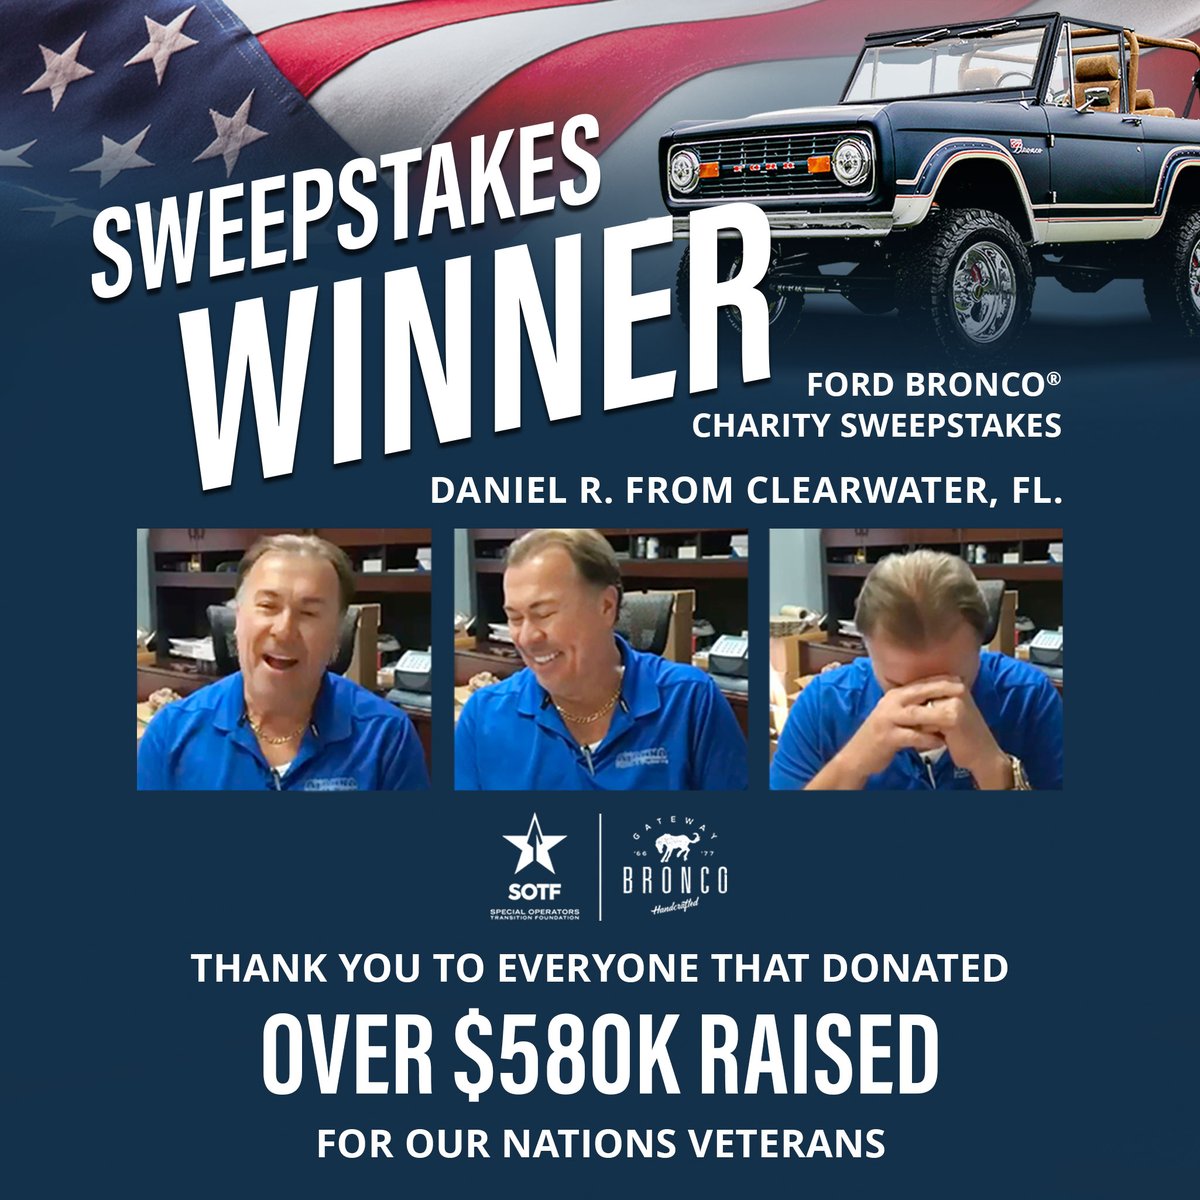 We are excited to announce our winner Daniel R. from Clearwater, FL. Watch full reveal: youtu.be/qpFjLeESVOk

We are grateful for the support with over 11,000 donations and over $580,000 raised for the @SpecialOpsTF. 
-
#gatewaybronco #SOTF #veterans #eatonperformance